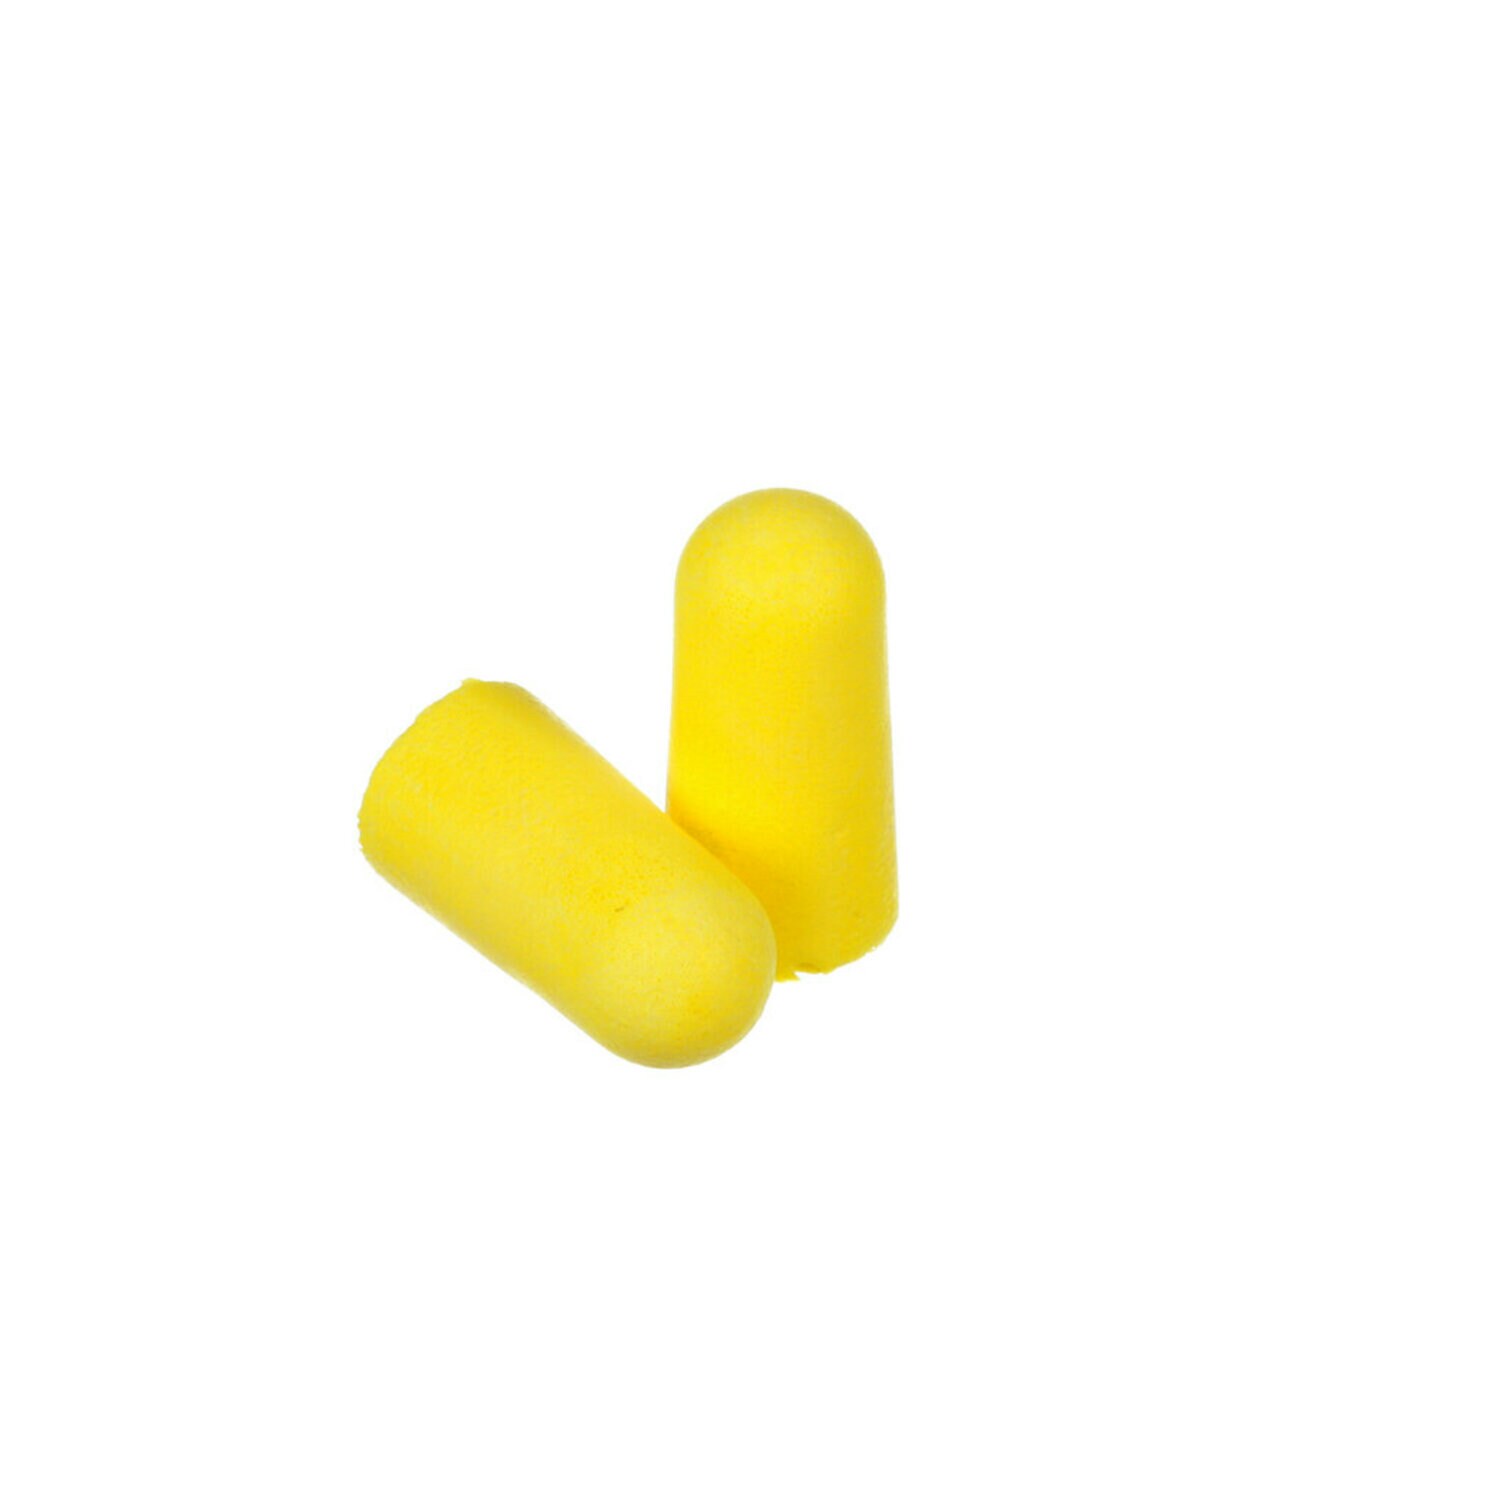 7000002310 - 3M E-A-R TaperFit 2 Earplugs 312-1219, Uncorded, Poly Bag, Regular
Size, 2000 Pair/Case